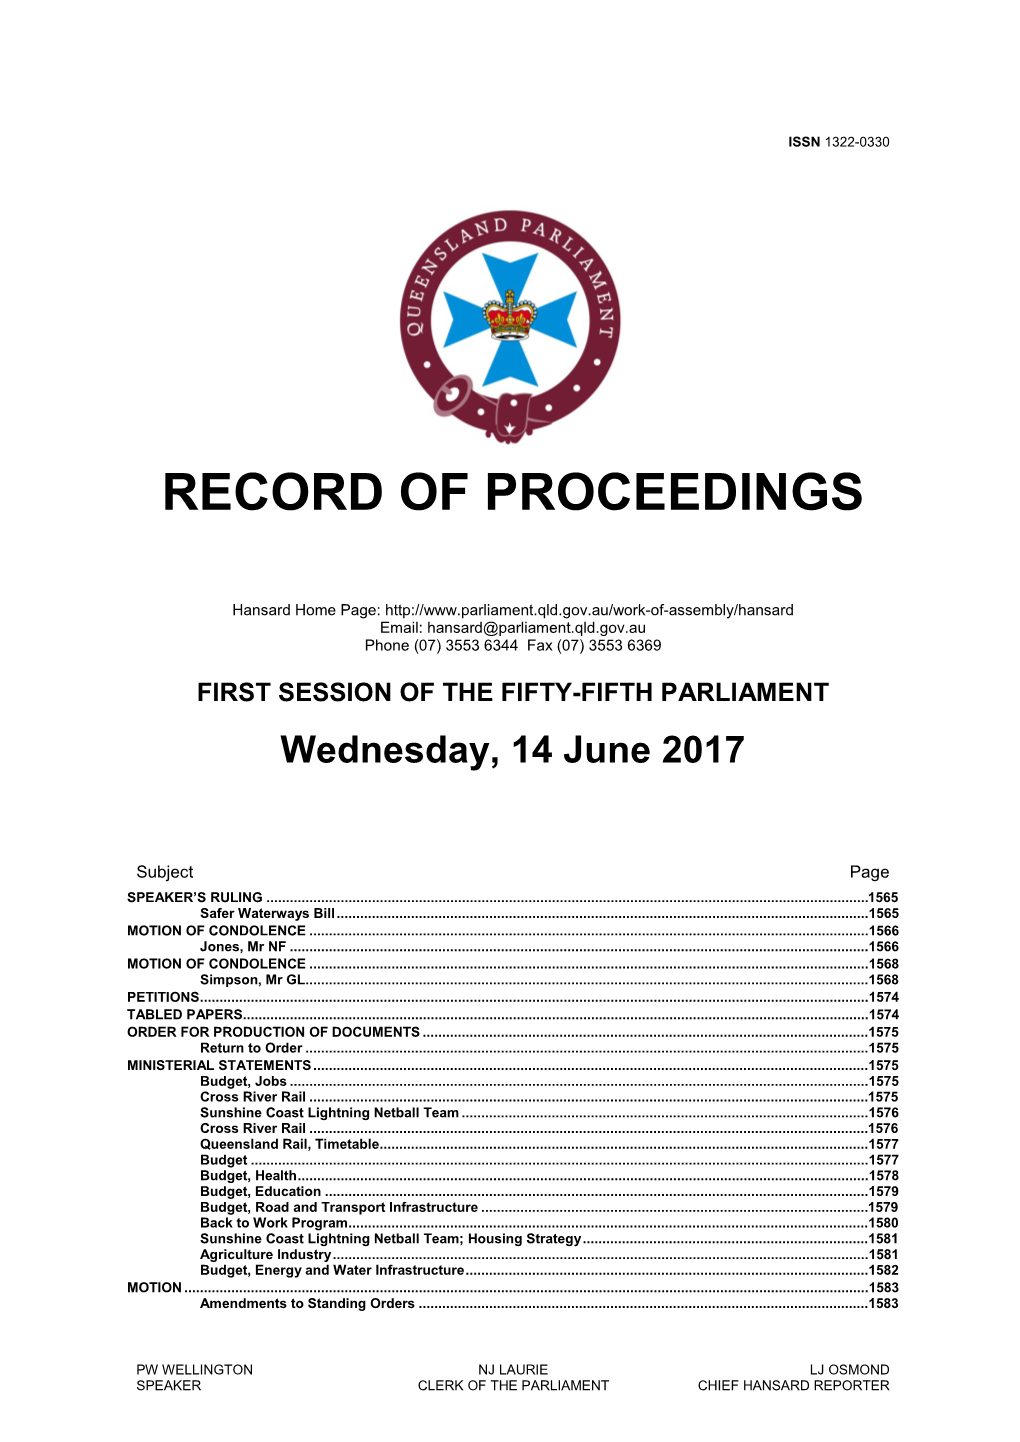 Order for Production of Documents